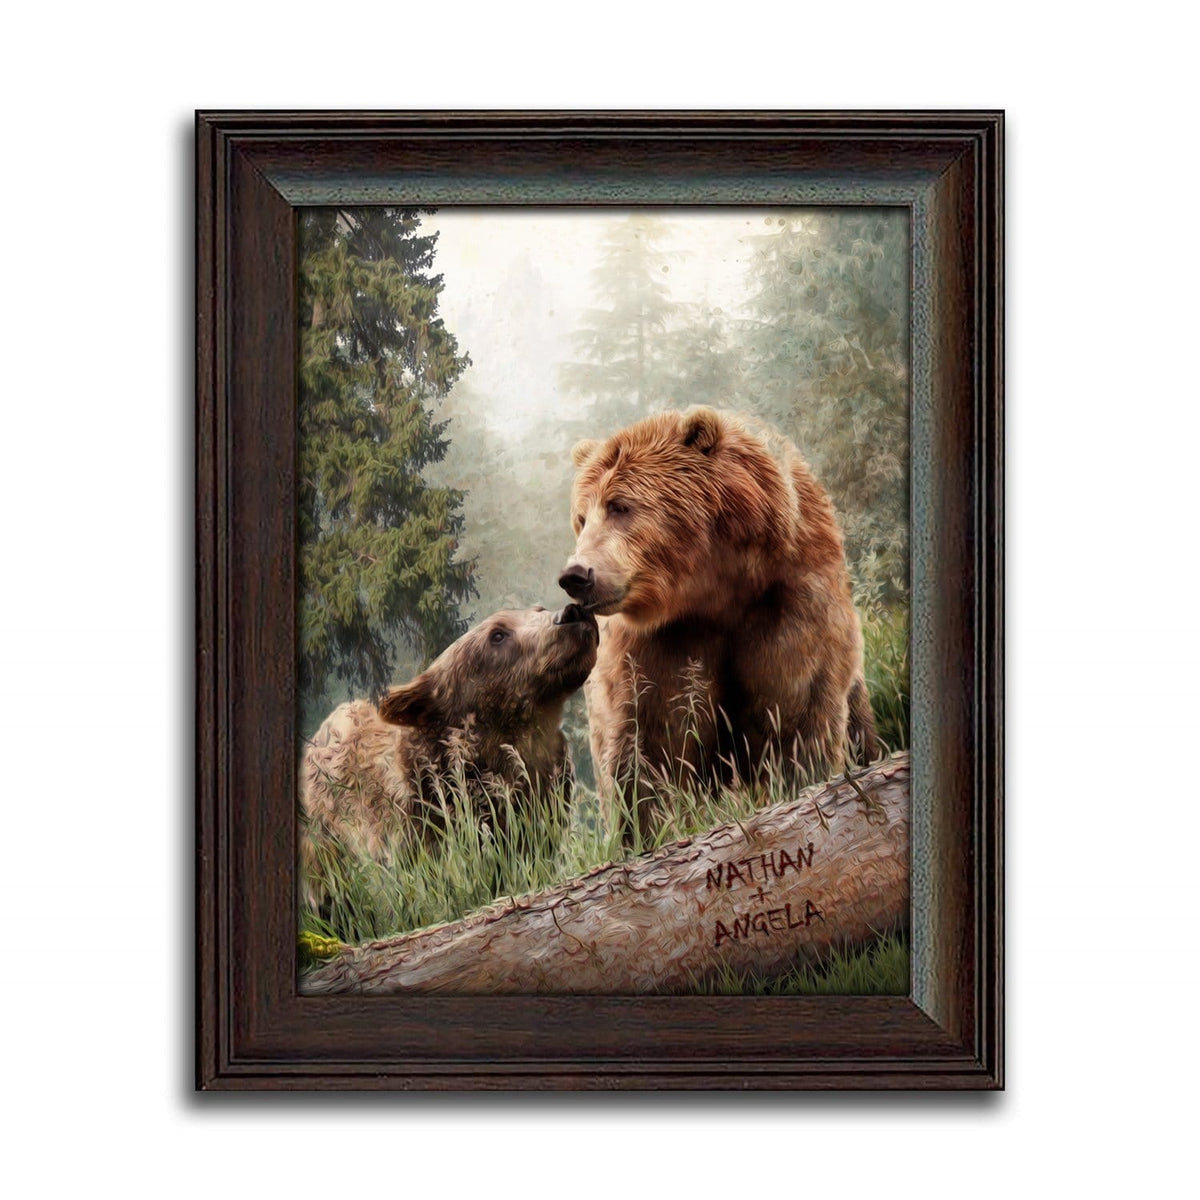 Grizzly Bear Art from Personal-Prints - Framed under glass